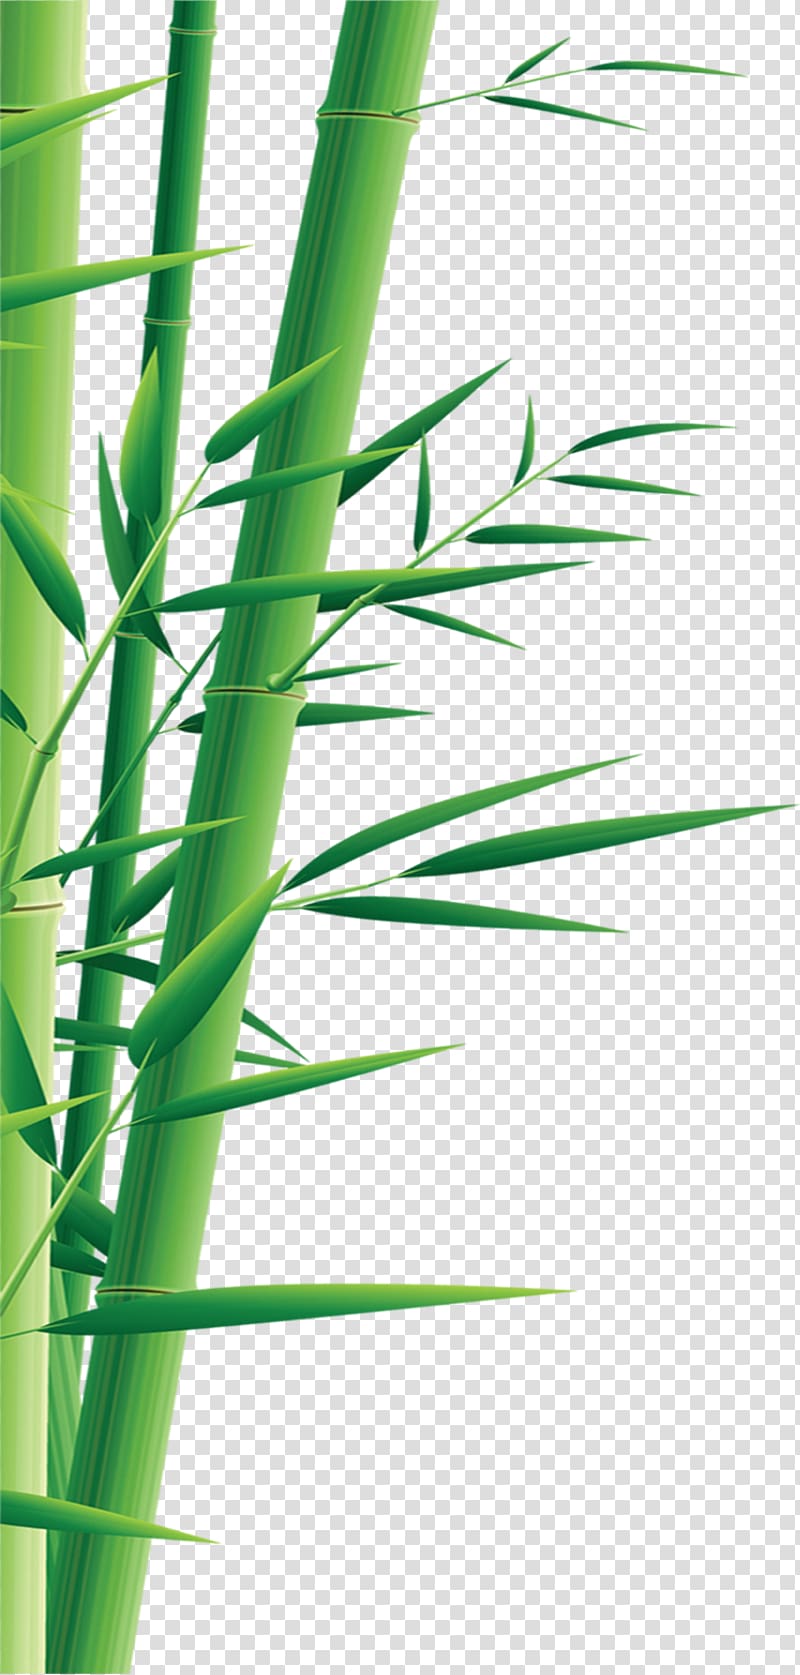 Graphic design Illustration, bamboo transparent background PNG clipart